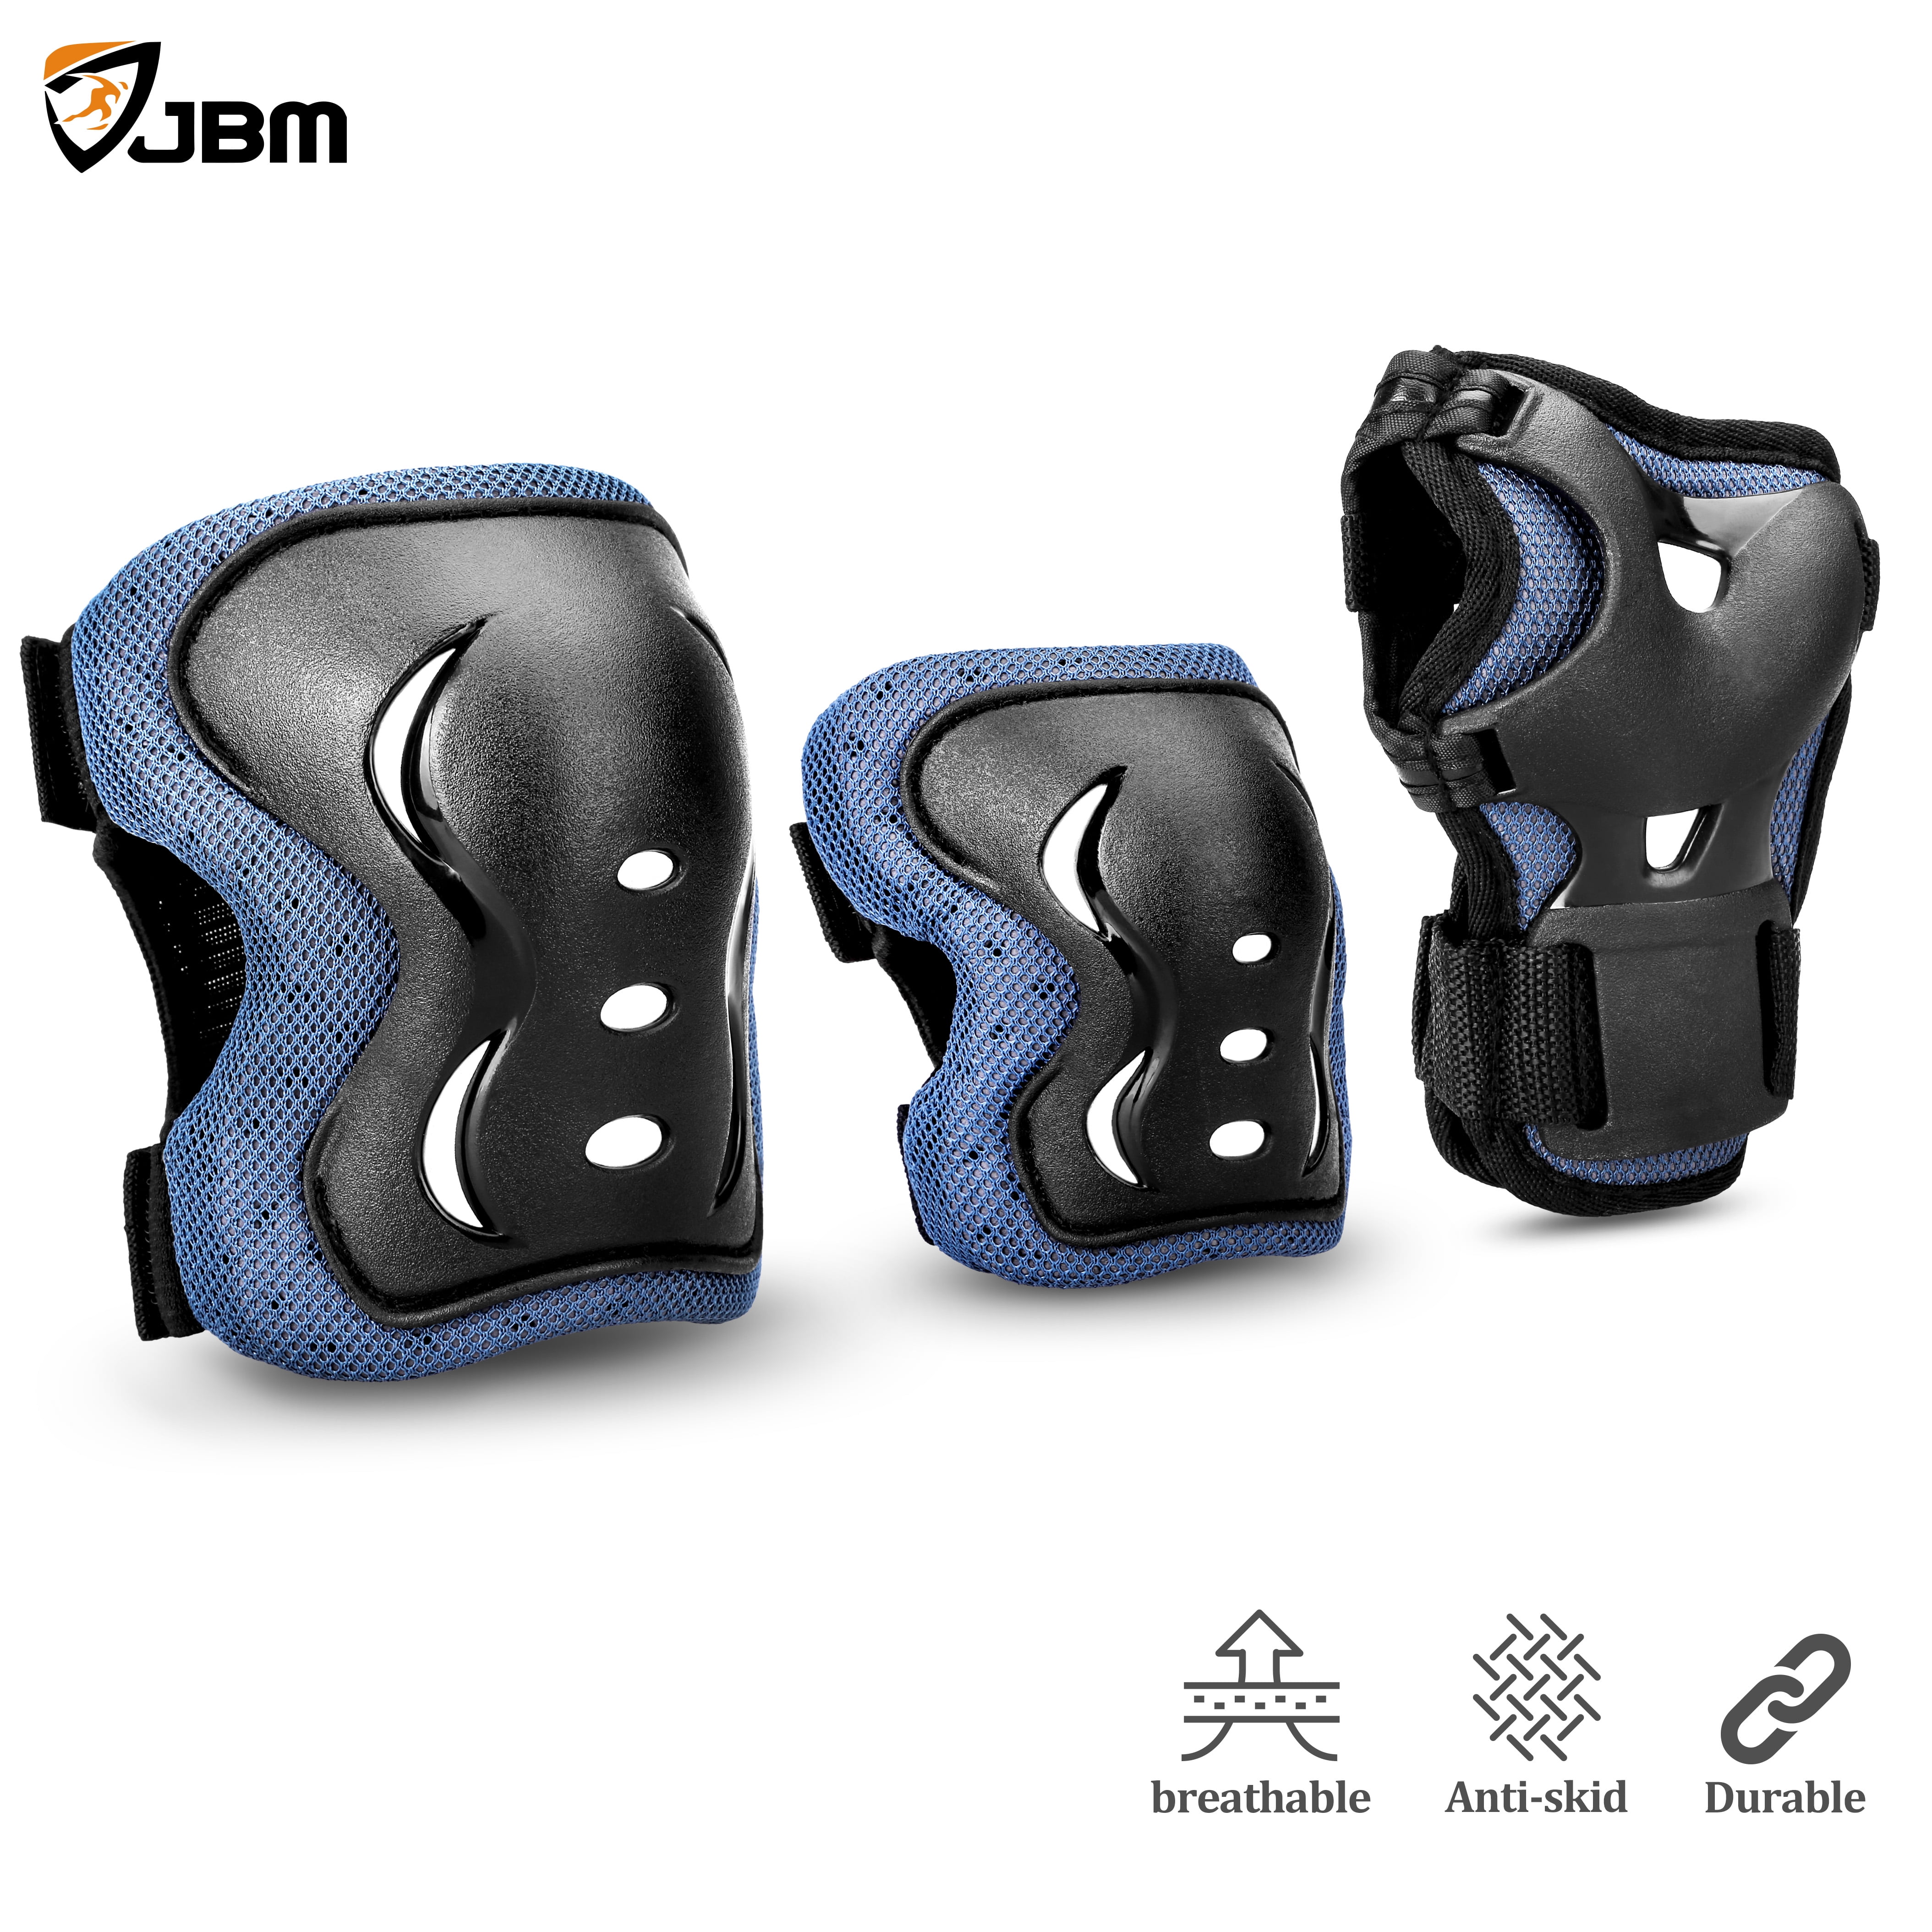 Kid Protective Gear Kit Helmet Knee Wrist Guard Elbow Pad for Skating Cycling US 